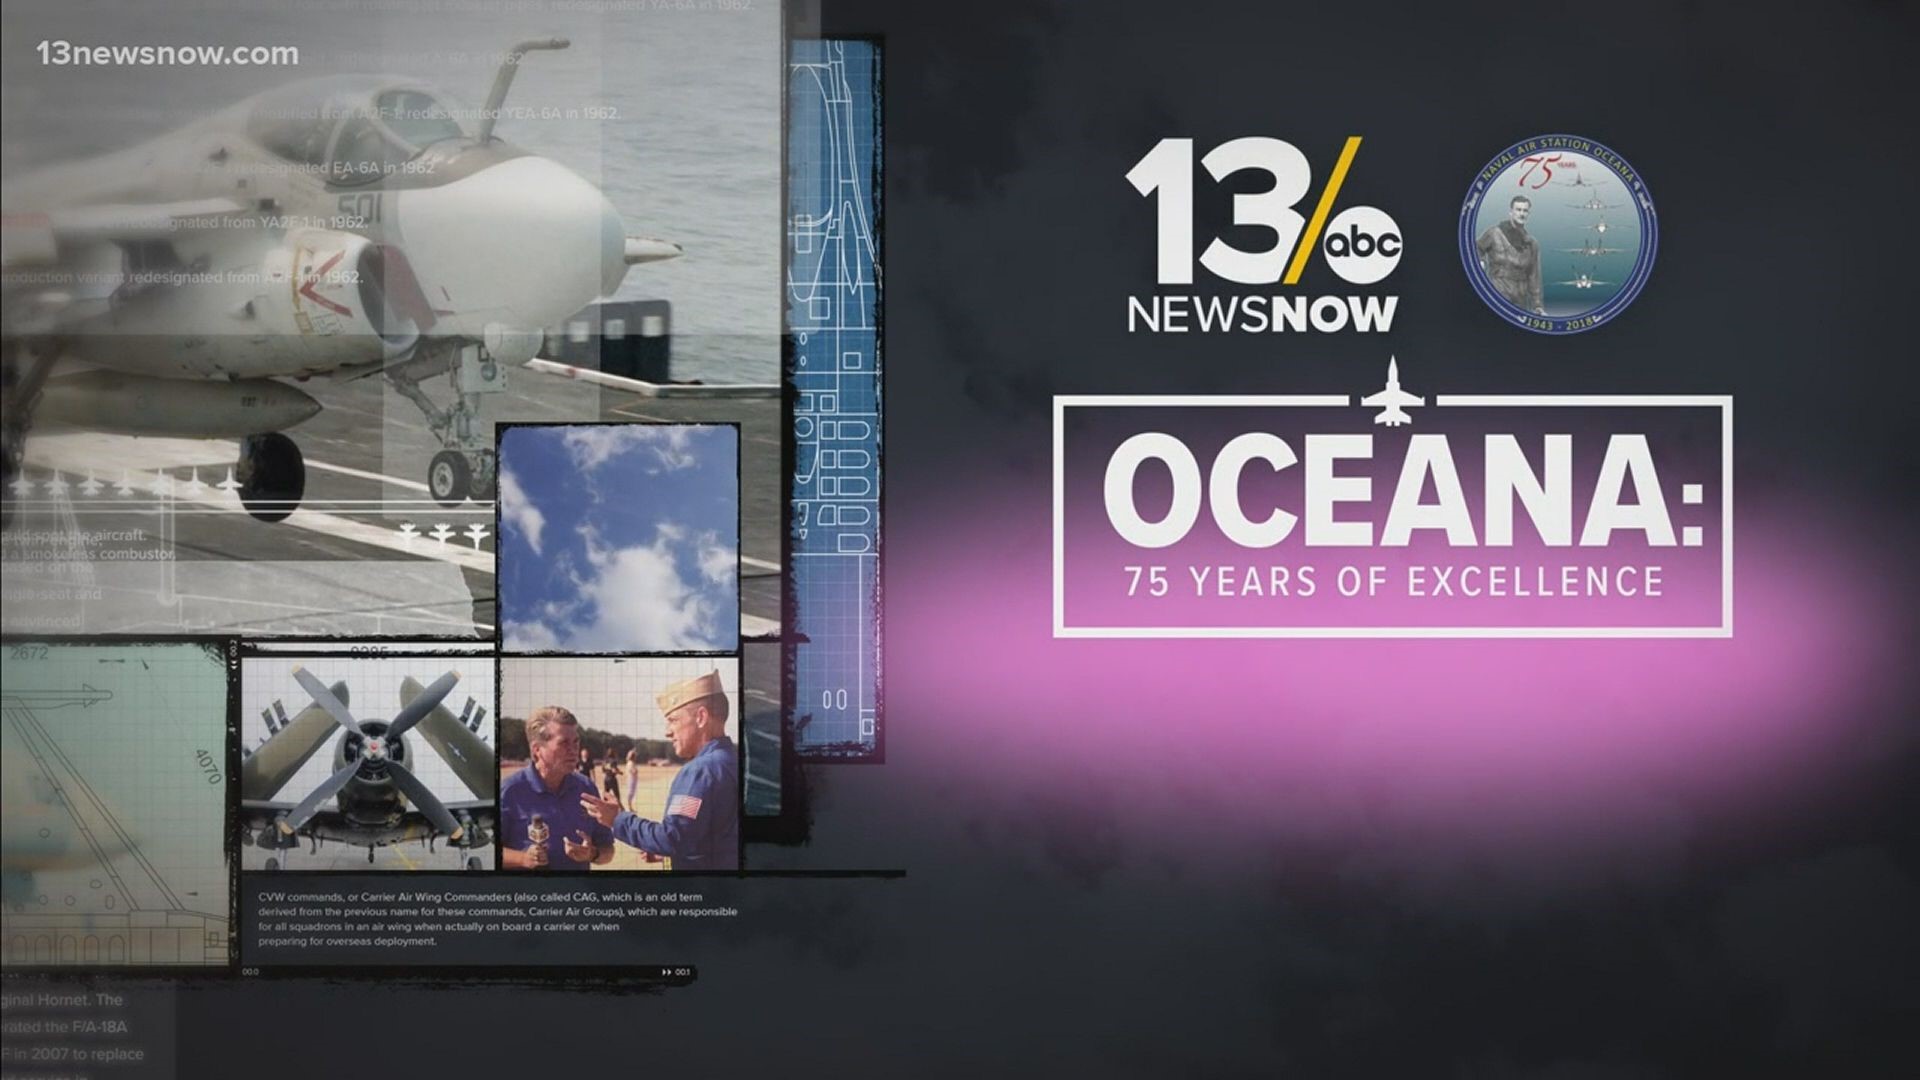 13News Now military reporter Mike Gooding looks back at the history of Naval Air Station Oceana in this 2018 special report, celebrating its 75th anniversary.